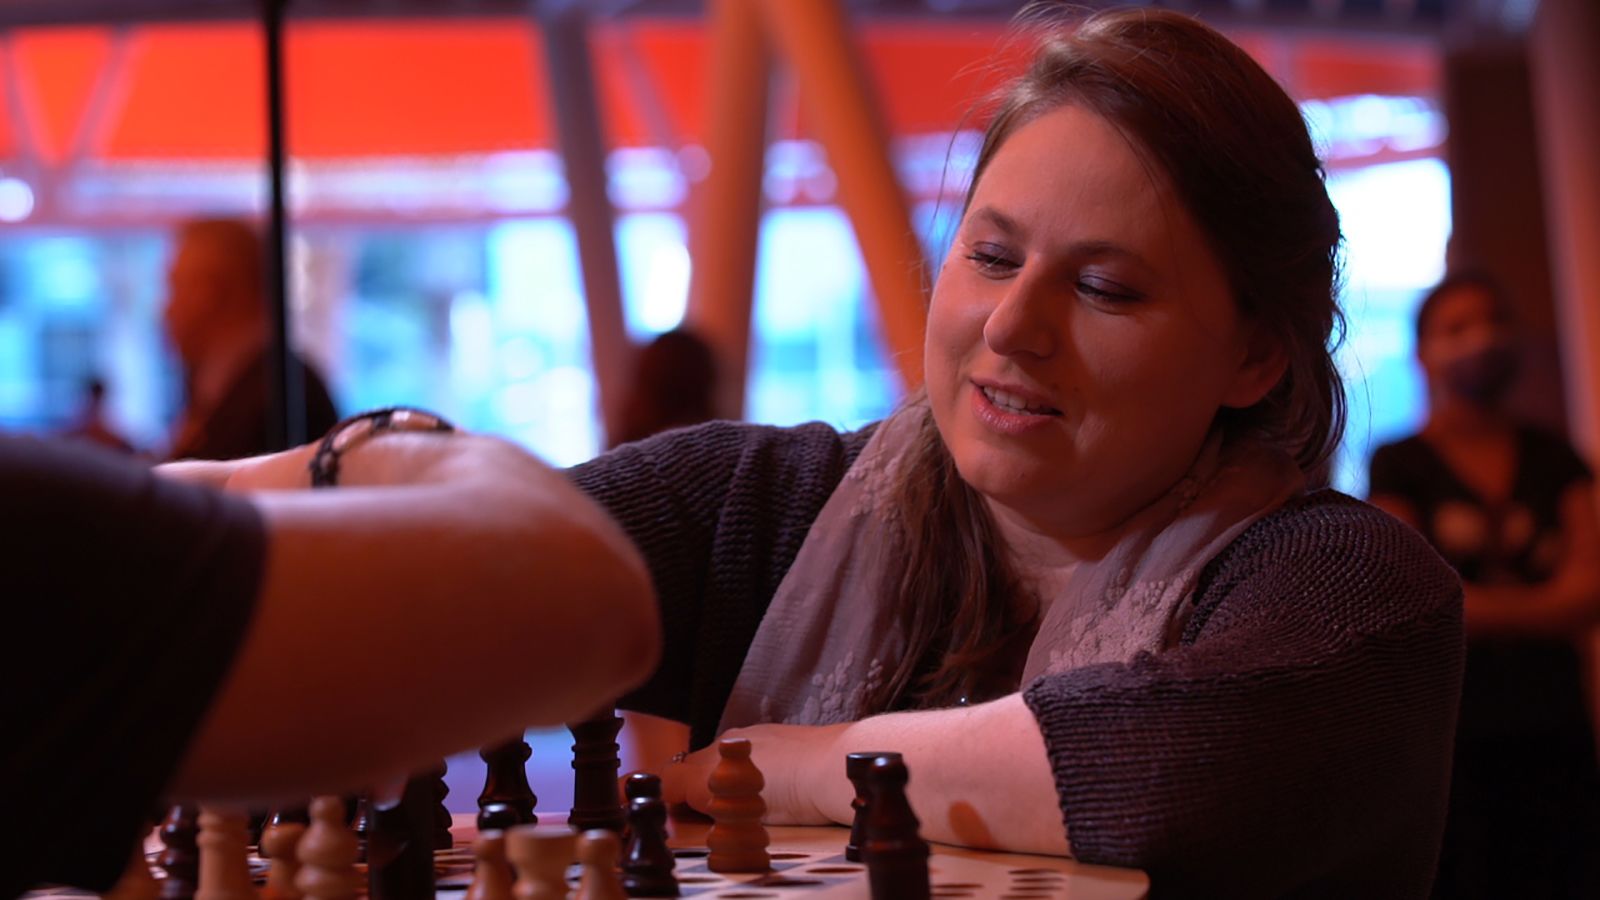 Top 10 Greatest Female Chess Players of All Time - Remote Chess Academy